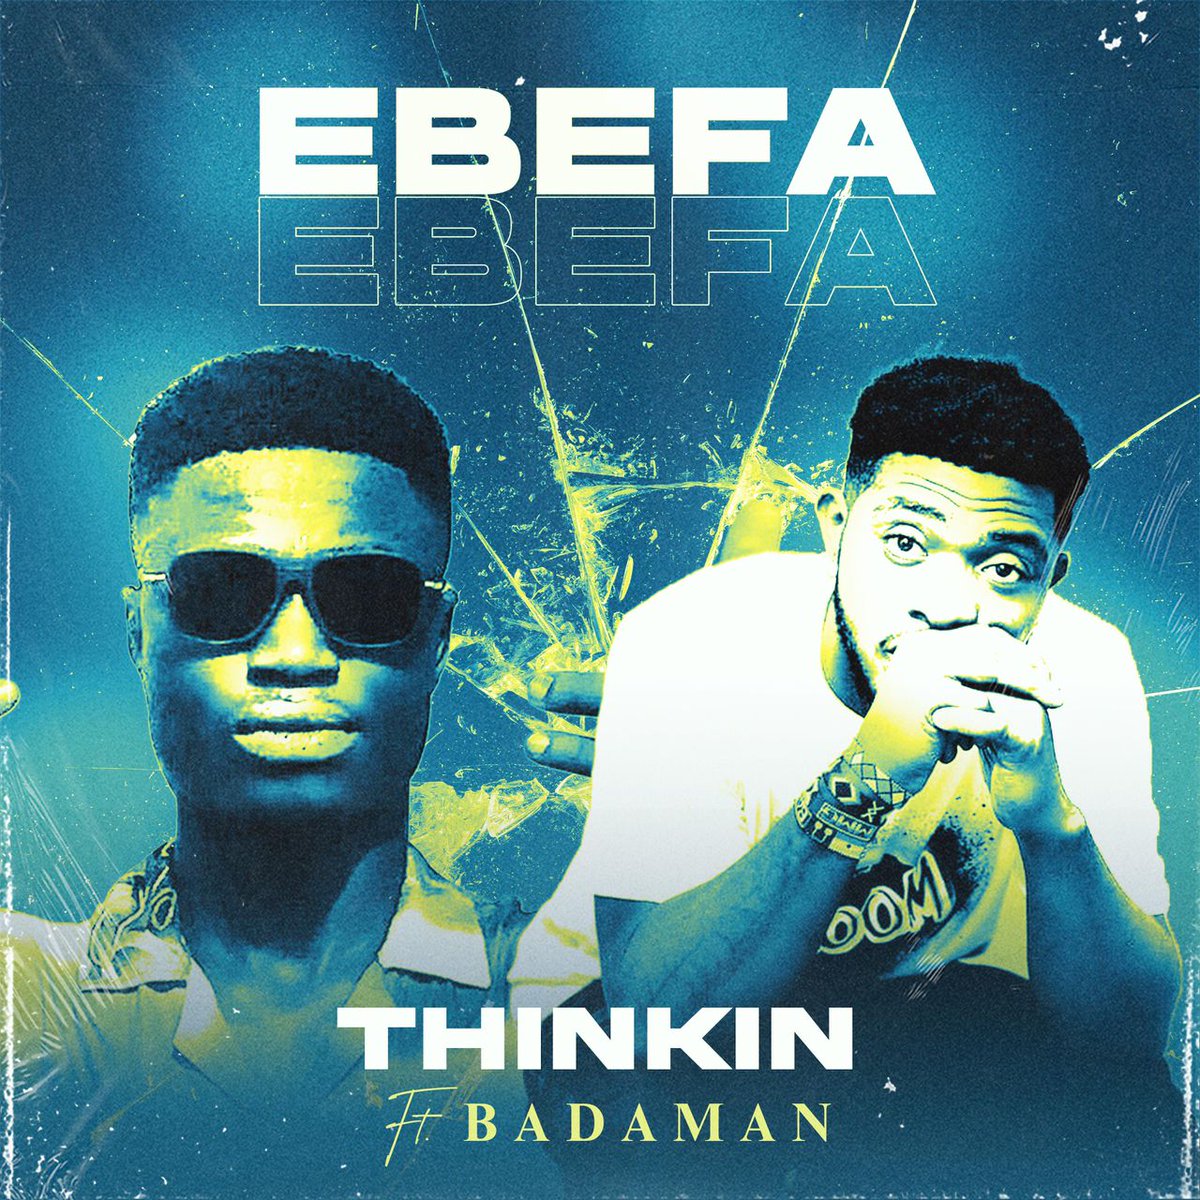 We’re starting things of with @Oboythinkin with his new record “EBEFA” on #newmusicmonday on #ShoutsOnY w/@winstonmicheals x @bigkris_dj #NMM